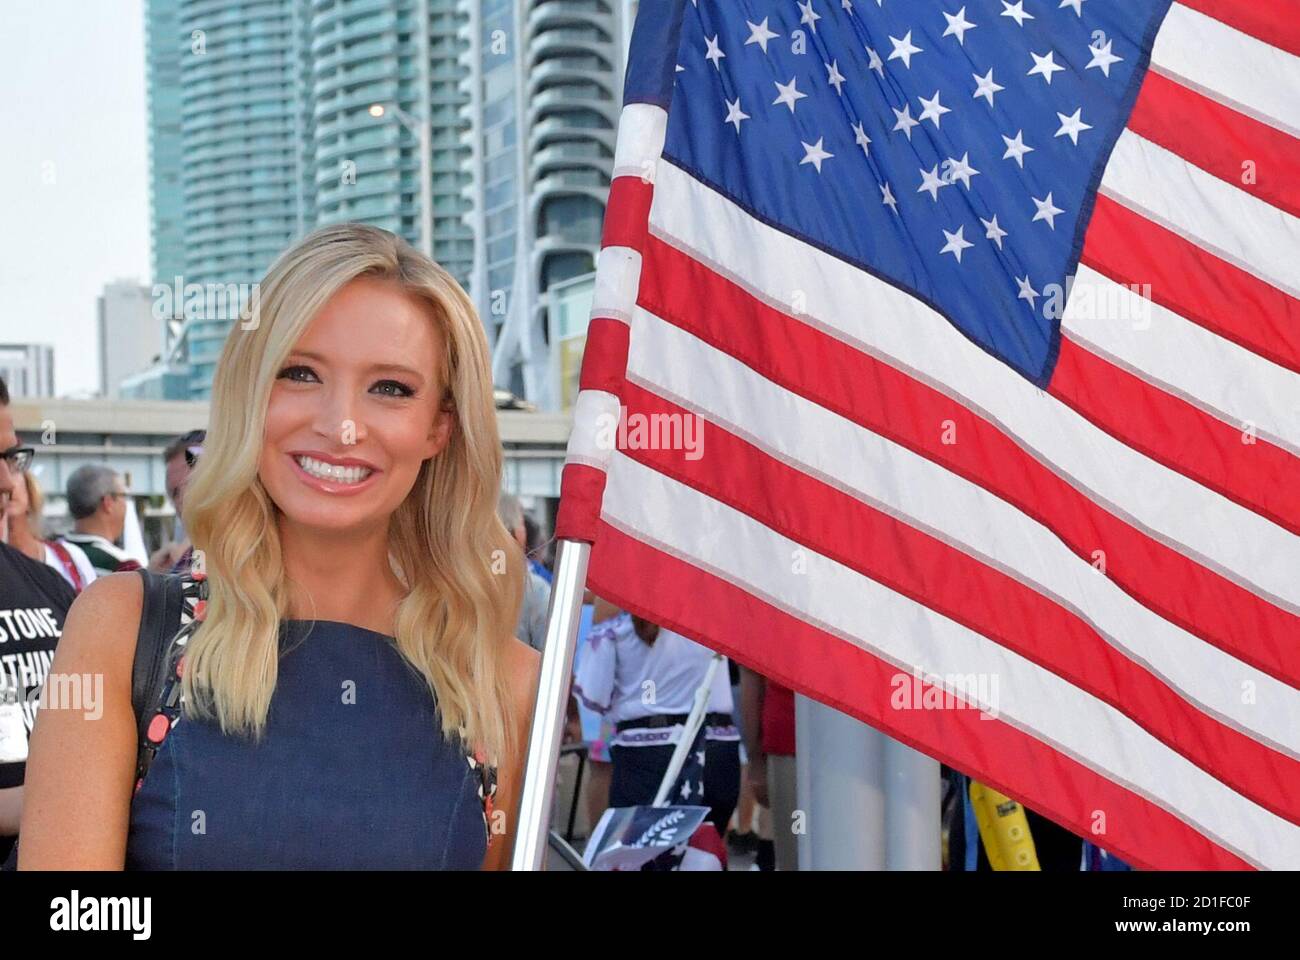 MIAMI, FLORIDA - JUNE 26: (EXCLUSIVE COVERAGE) President Trumps Newly appointed White House Press Secretary Kayleigh McEnany joins Protesters outside prior to the first 2020 Democratic presidential debate including New York police officers that are protesting New York Mayor Bill de Blasio. A field of 20 Democratic presidential candidates was split into two groups of 10 for the first debate of the 2020 election, taking place over two nights at Knight Concert Hall of the Adrienne Arsht Center for the Performing Arts of Miami-Dade County on June 26, 2019 in Miami, Florida Credit: Hoo-me/MediaPu Stock Photo